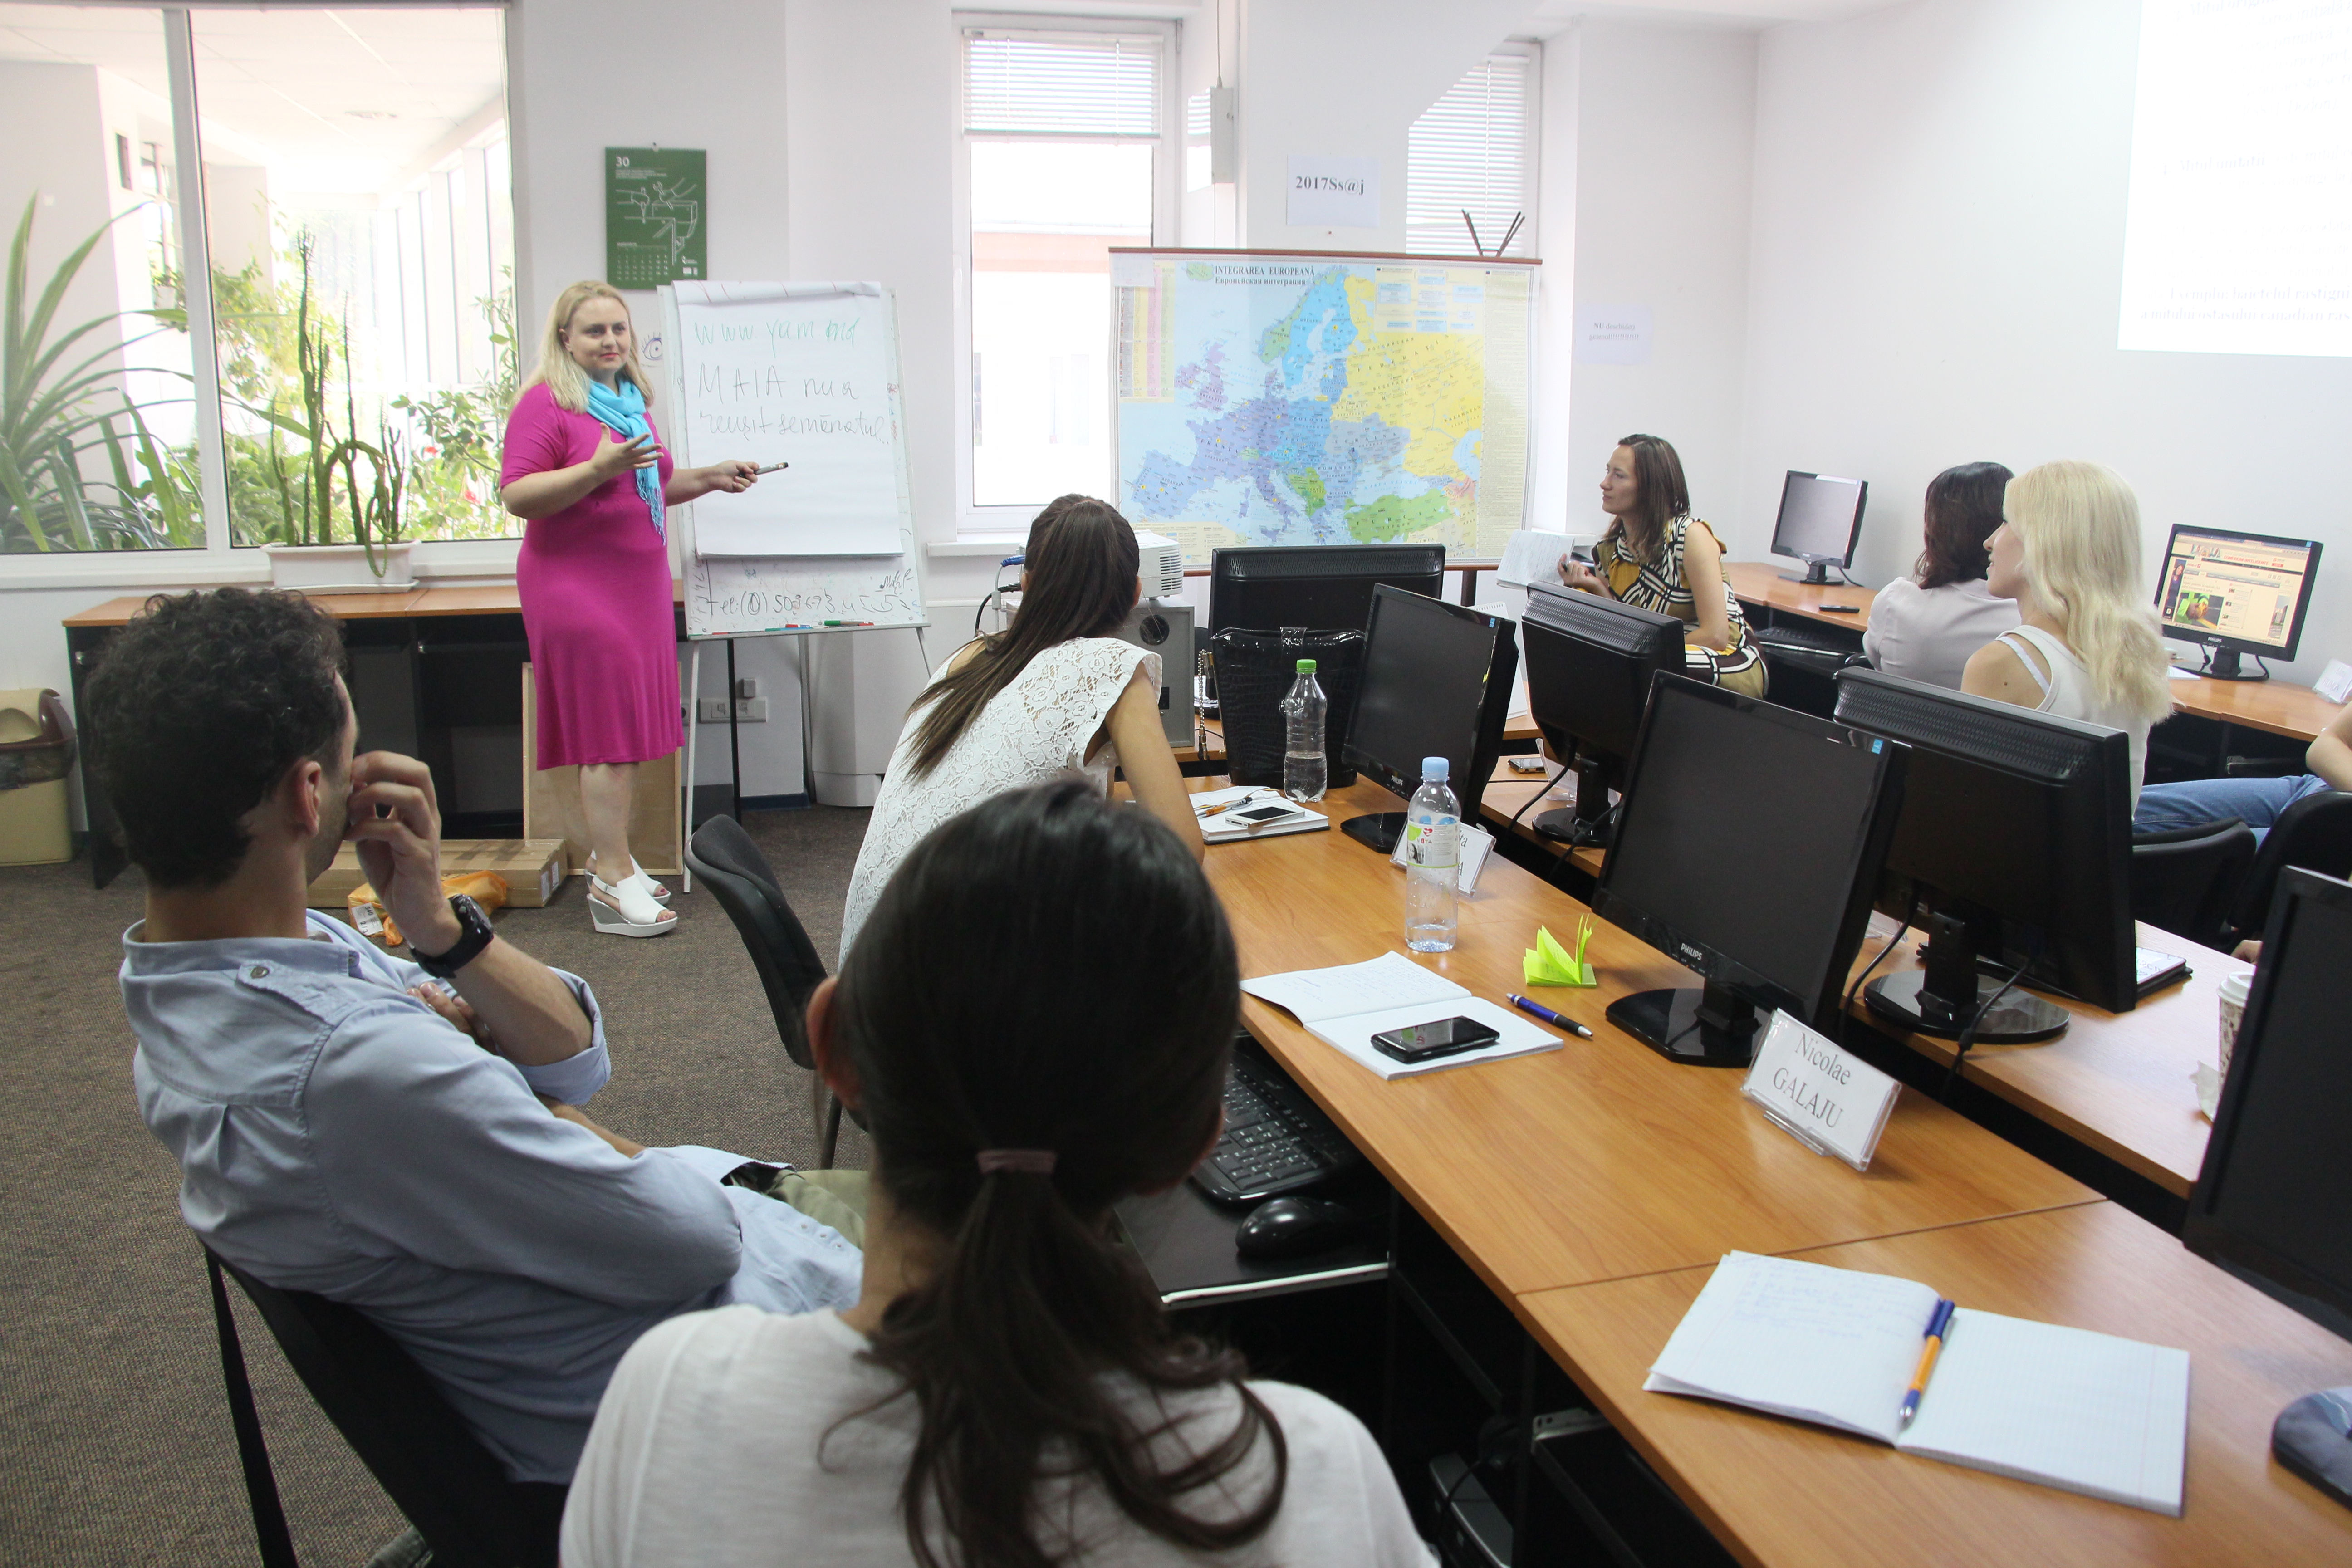 Introduction to Journalism, the first course of initiation for SAJ students